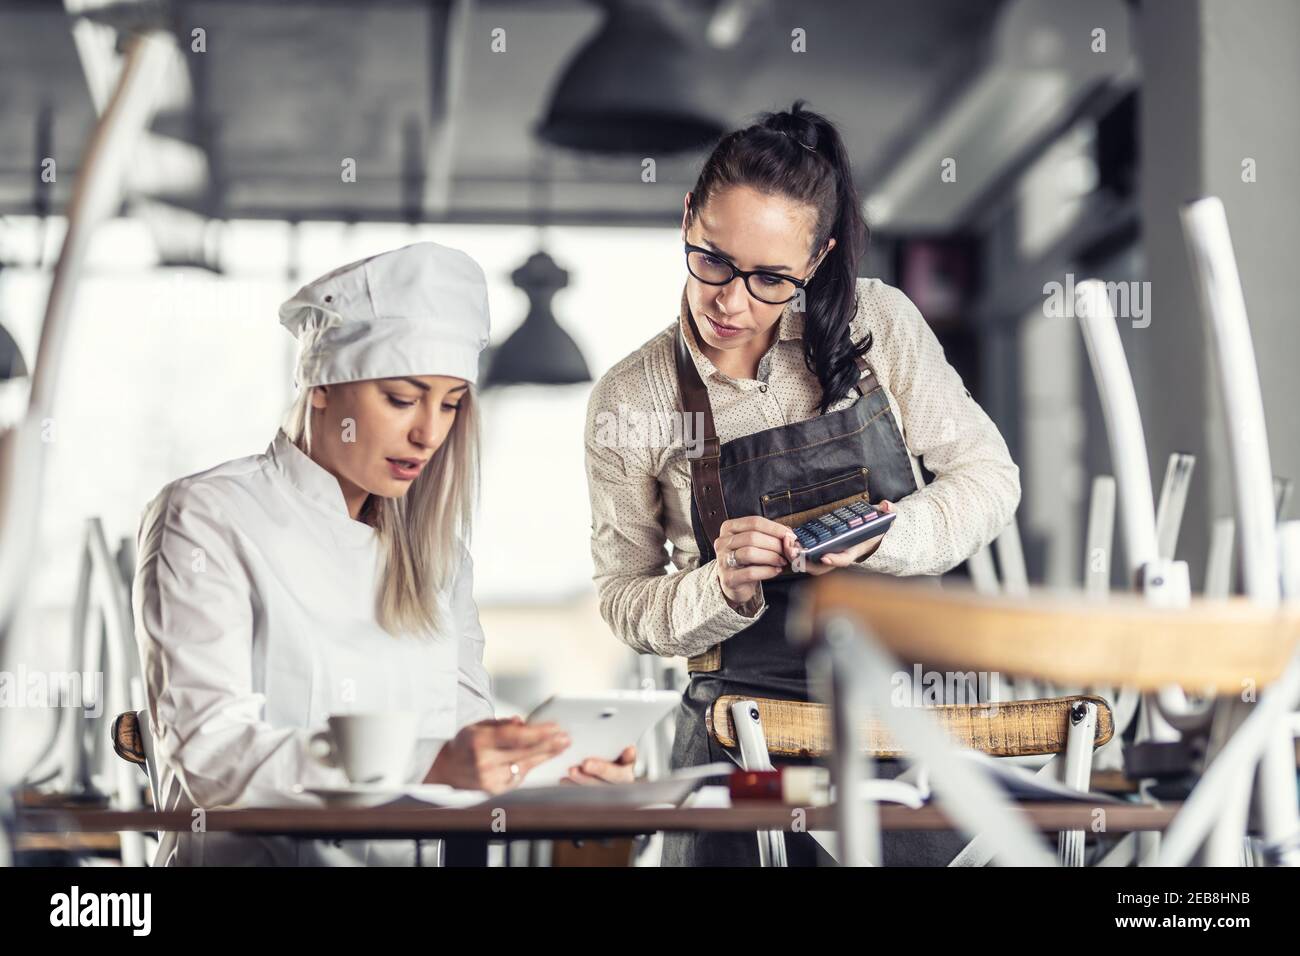 Female chef and waitress sit over bills calculating after hours in a restaurant. Stock Photo